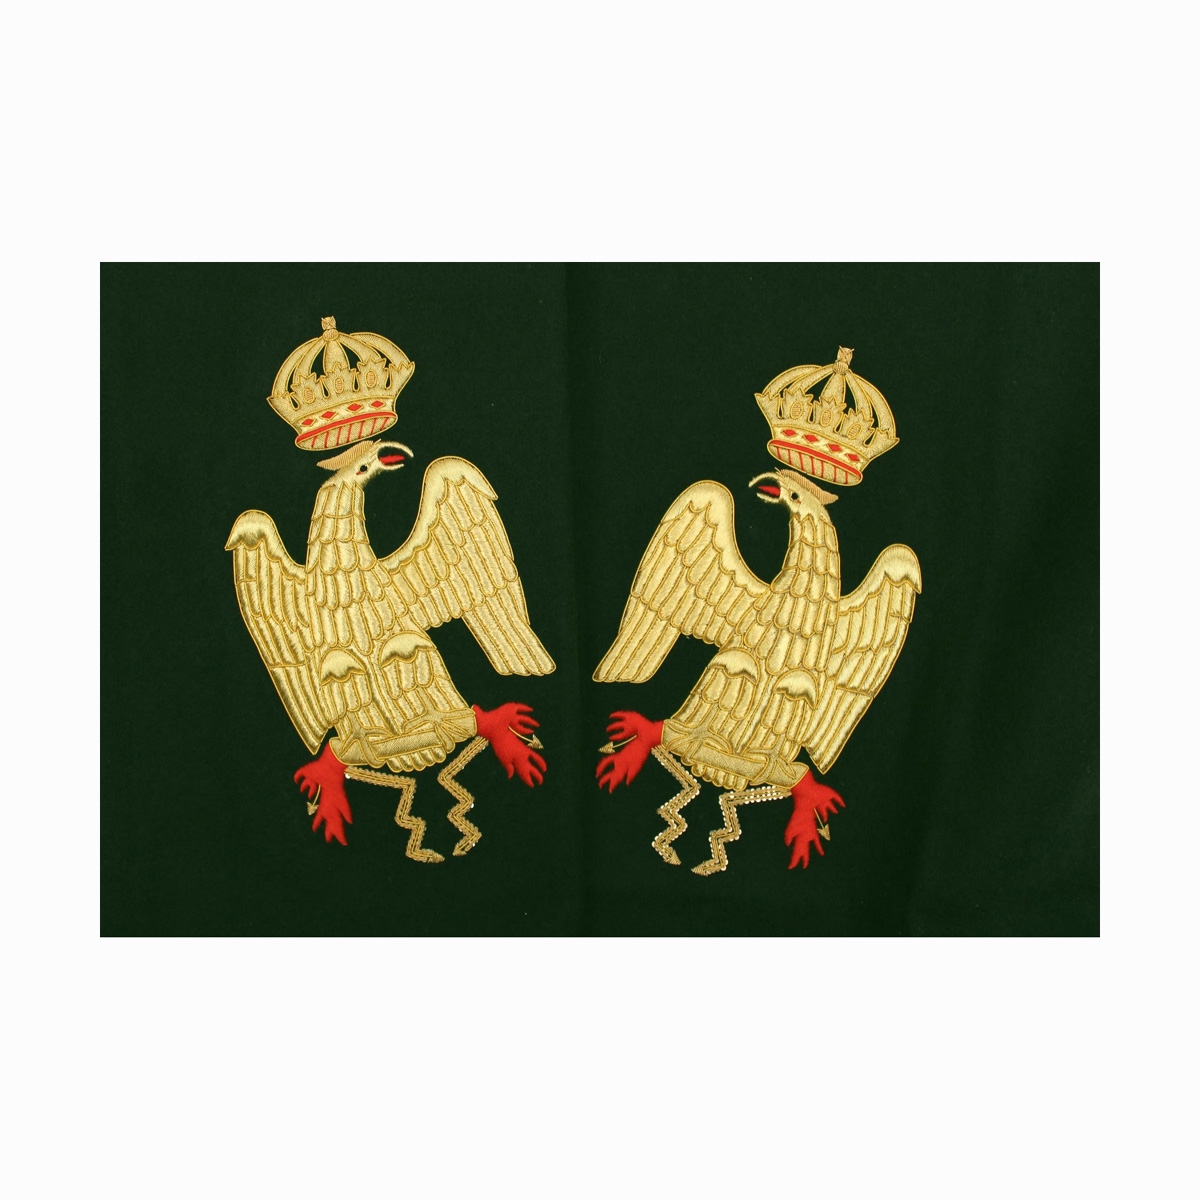 Pair of eagles  gold work  flag high quality embroidered customized